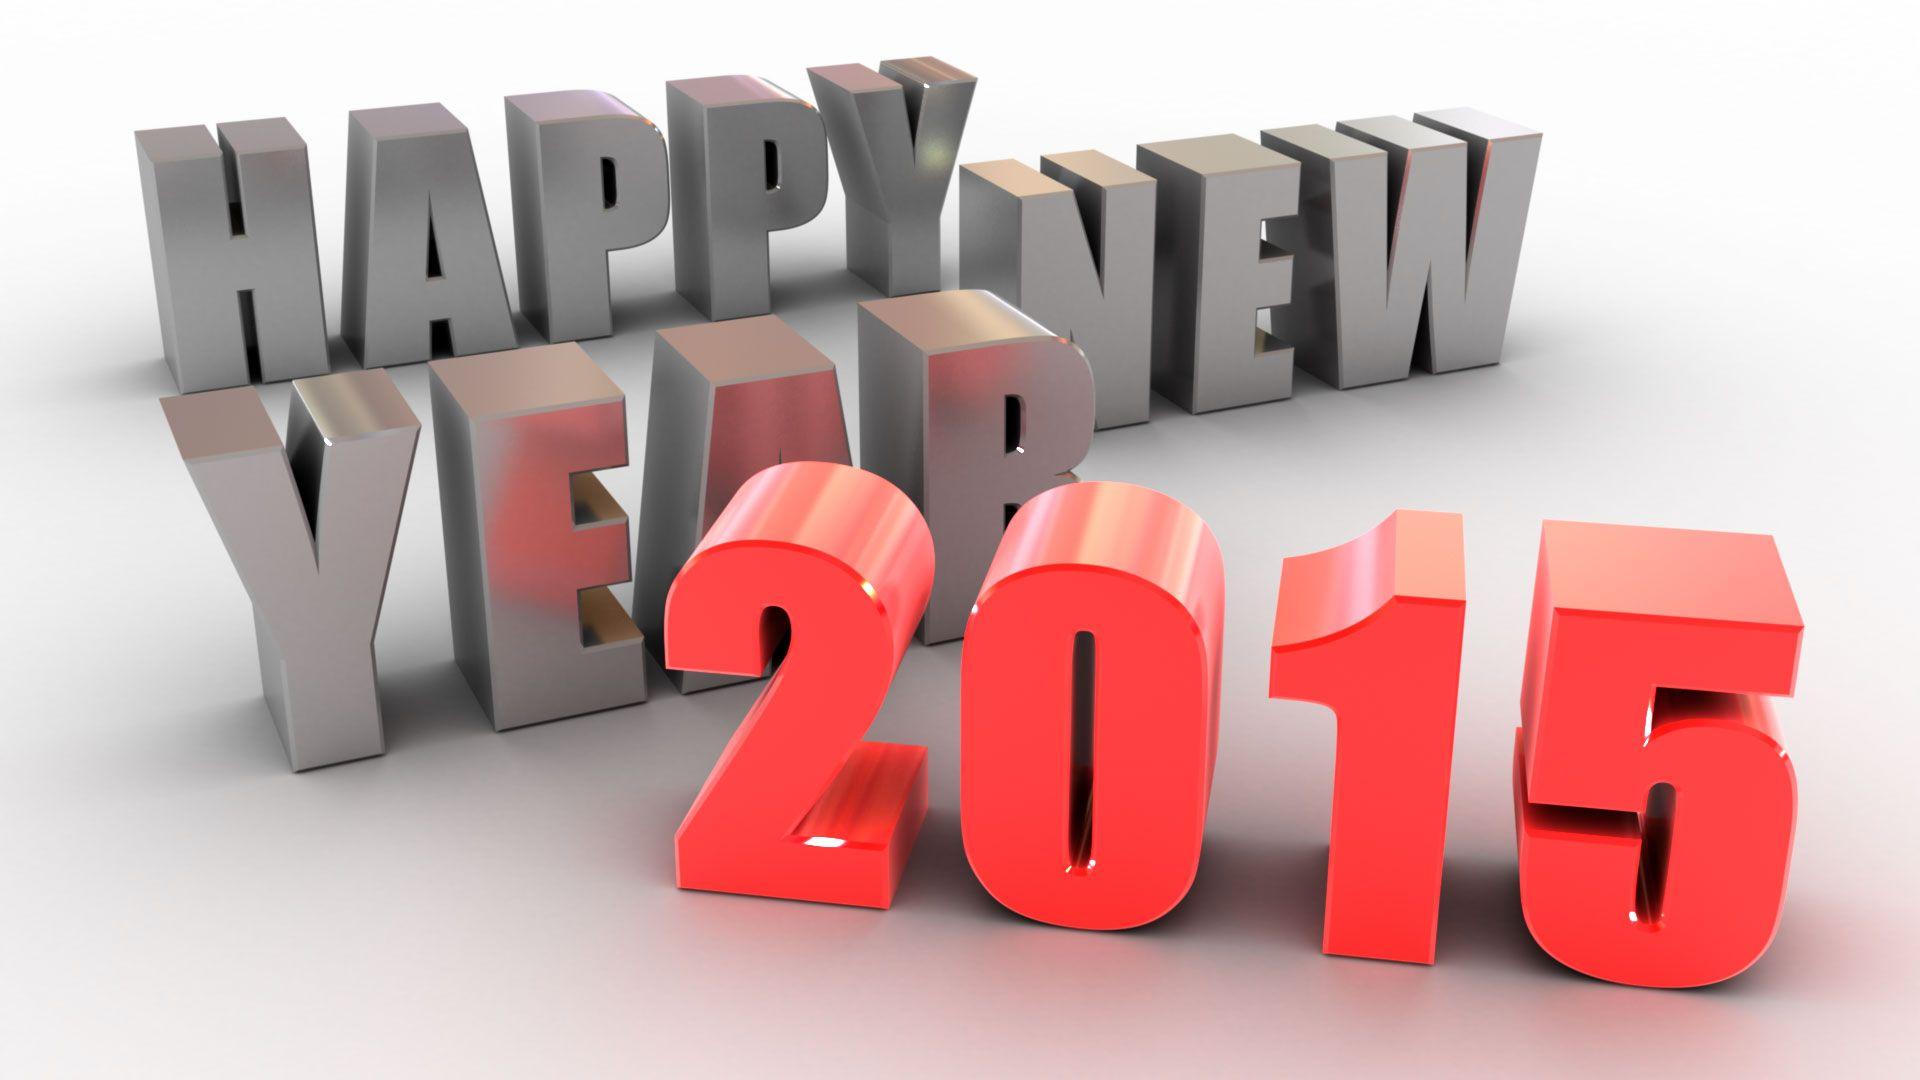 Happy New Year 2015 Wallpaper Collection. Smash Blog Trends